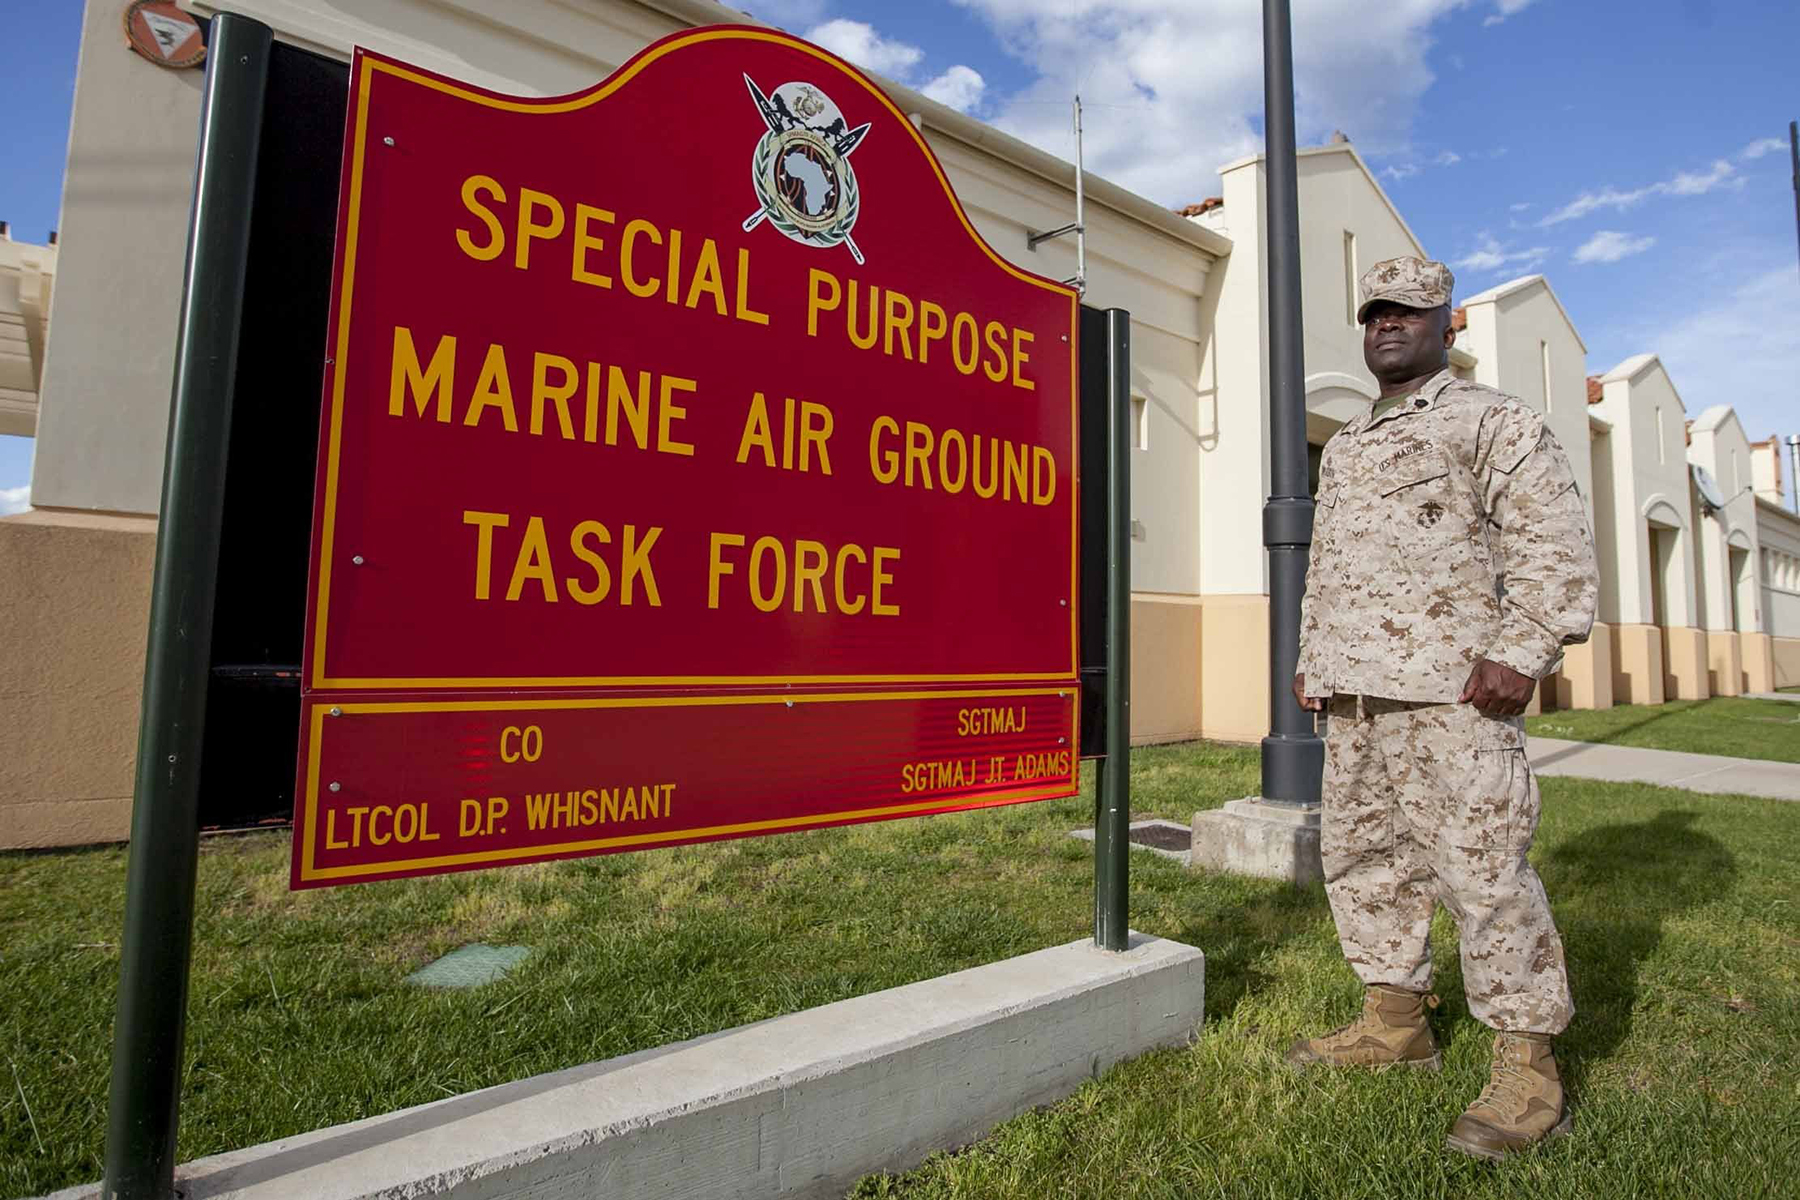 Meet the incoming Sergeant Major of the Marine Corps - Task & Purpose